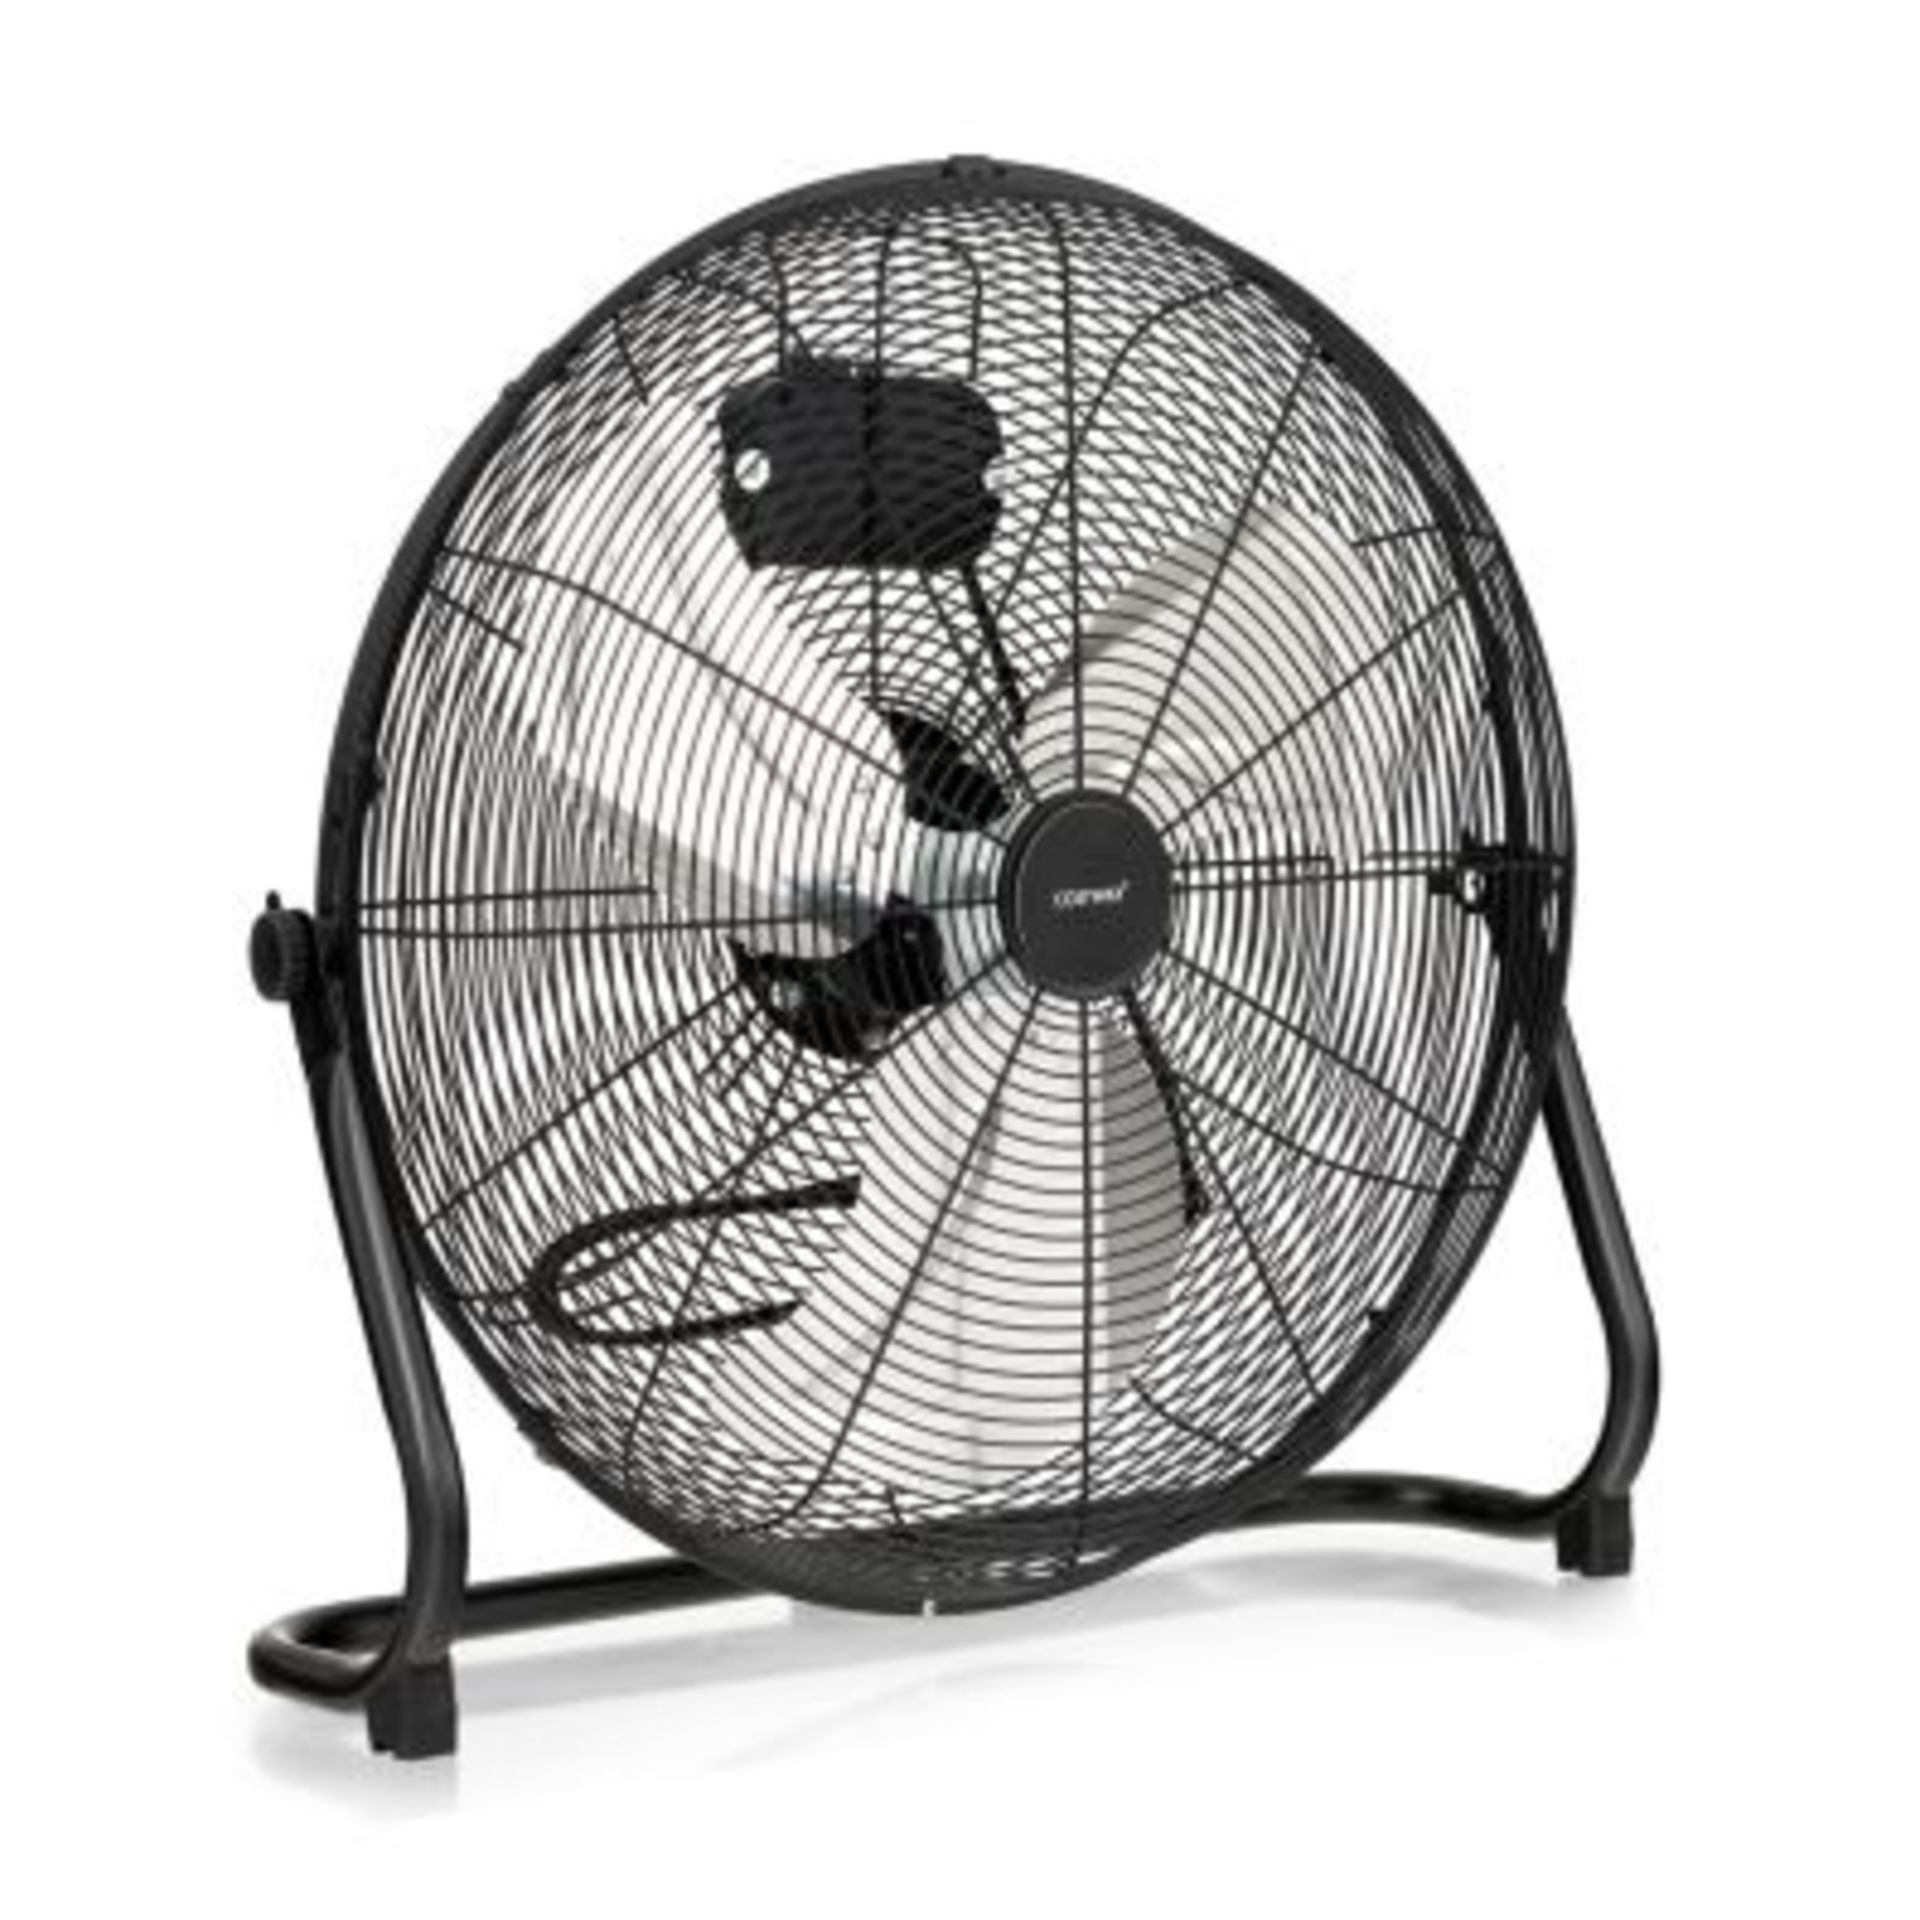 160W High Velocity Floor Fan with 3 Speed and Adjustable Tilting Head - ER54